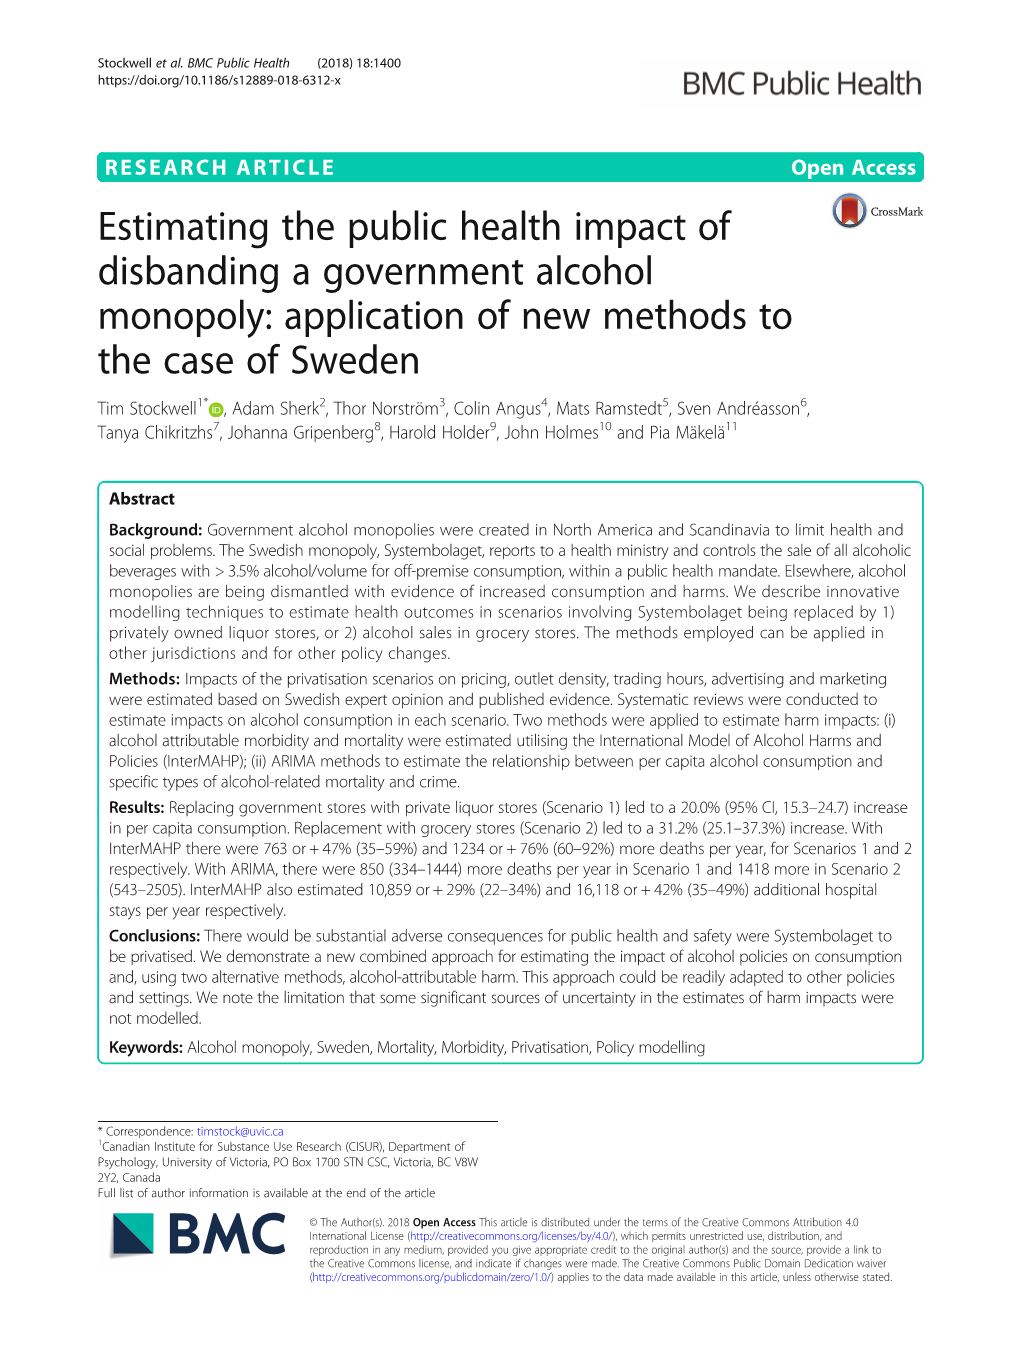 Estimating the Public Health Impact of Disbanding a Government Alcohol Monopoly: Application of New Methods to the Case of Swede